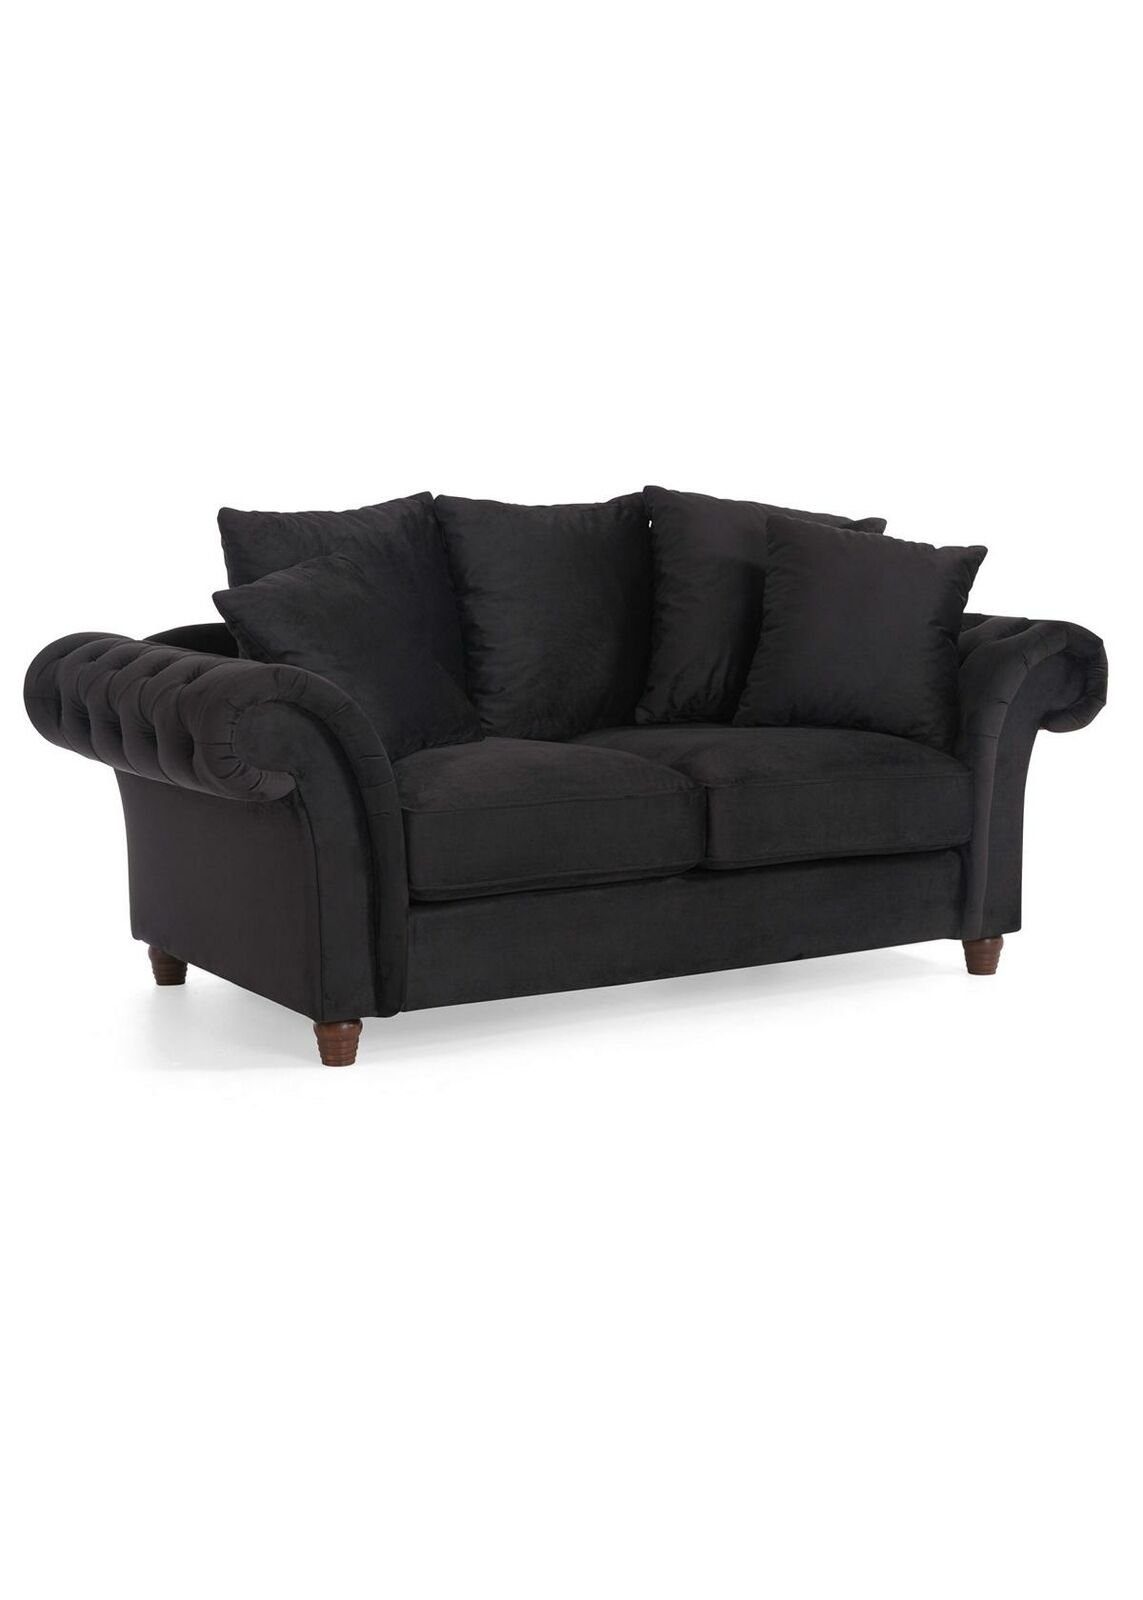 JVmoebel Sofa Design Sofa 2 Sitzer Chesterfield Stoff Couch Sofa Polster Sofa, Made in Europe